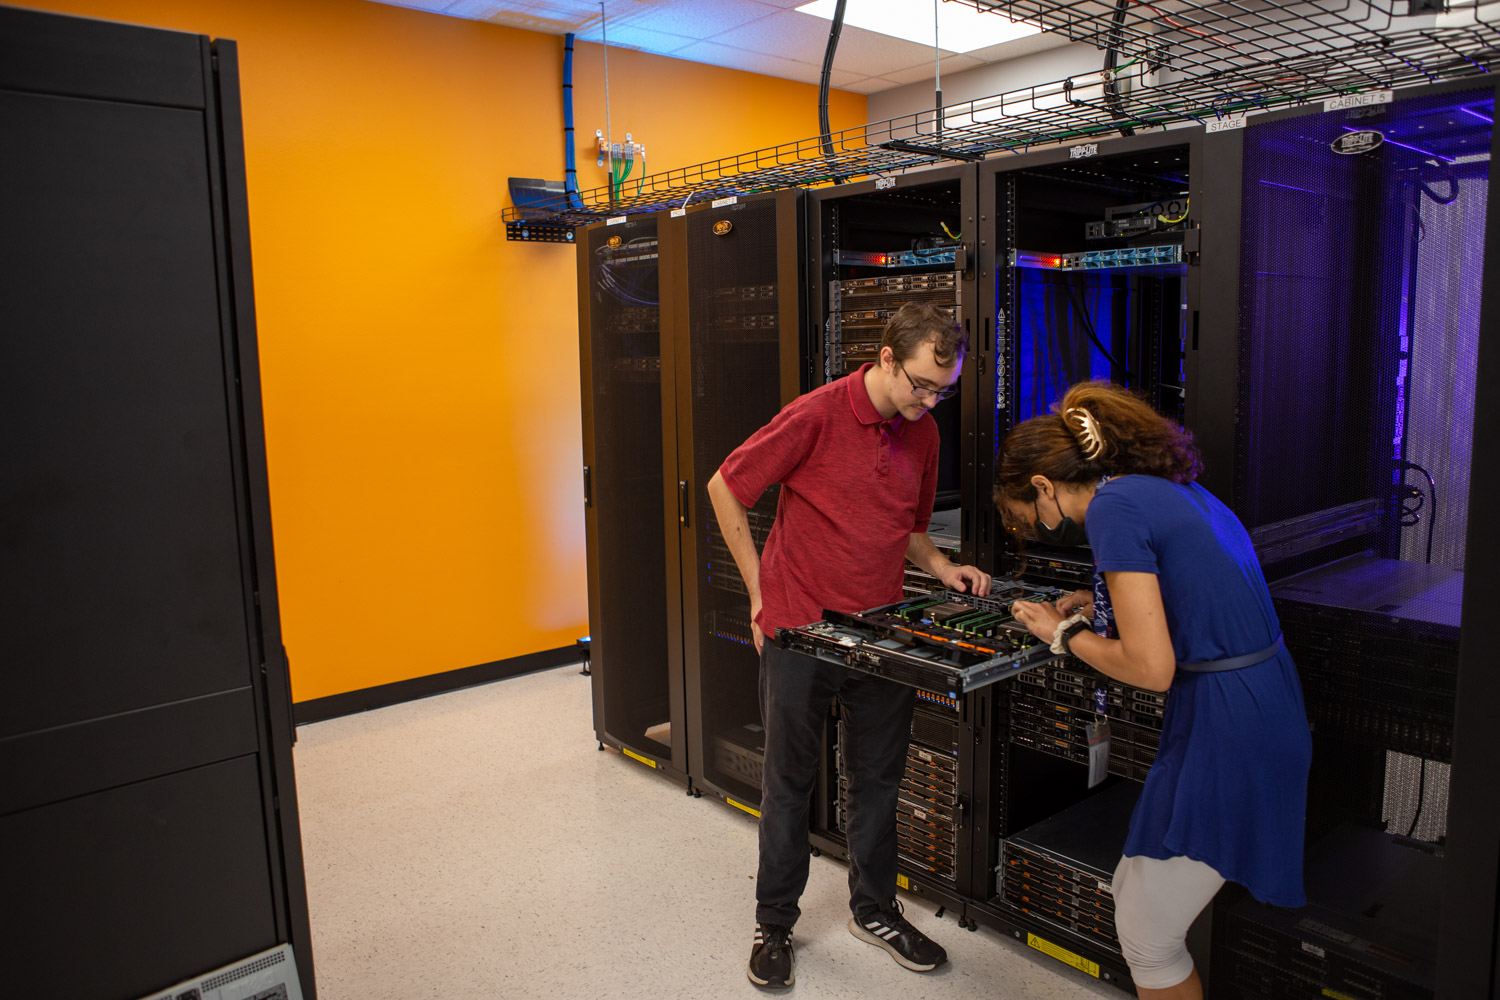 students interacting with computer servers on a rack